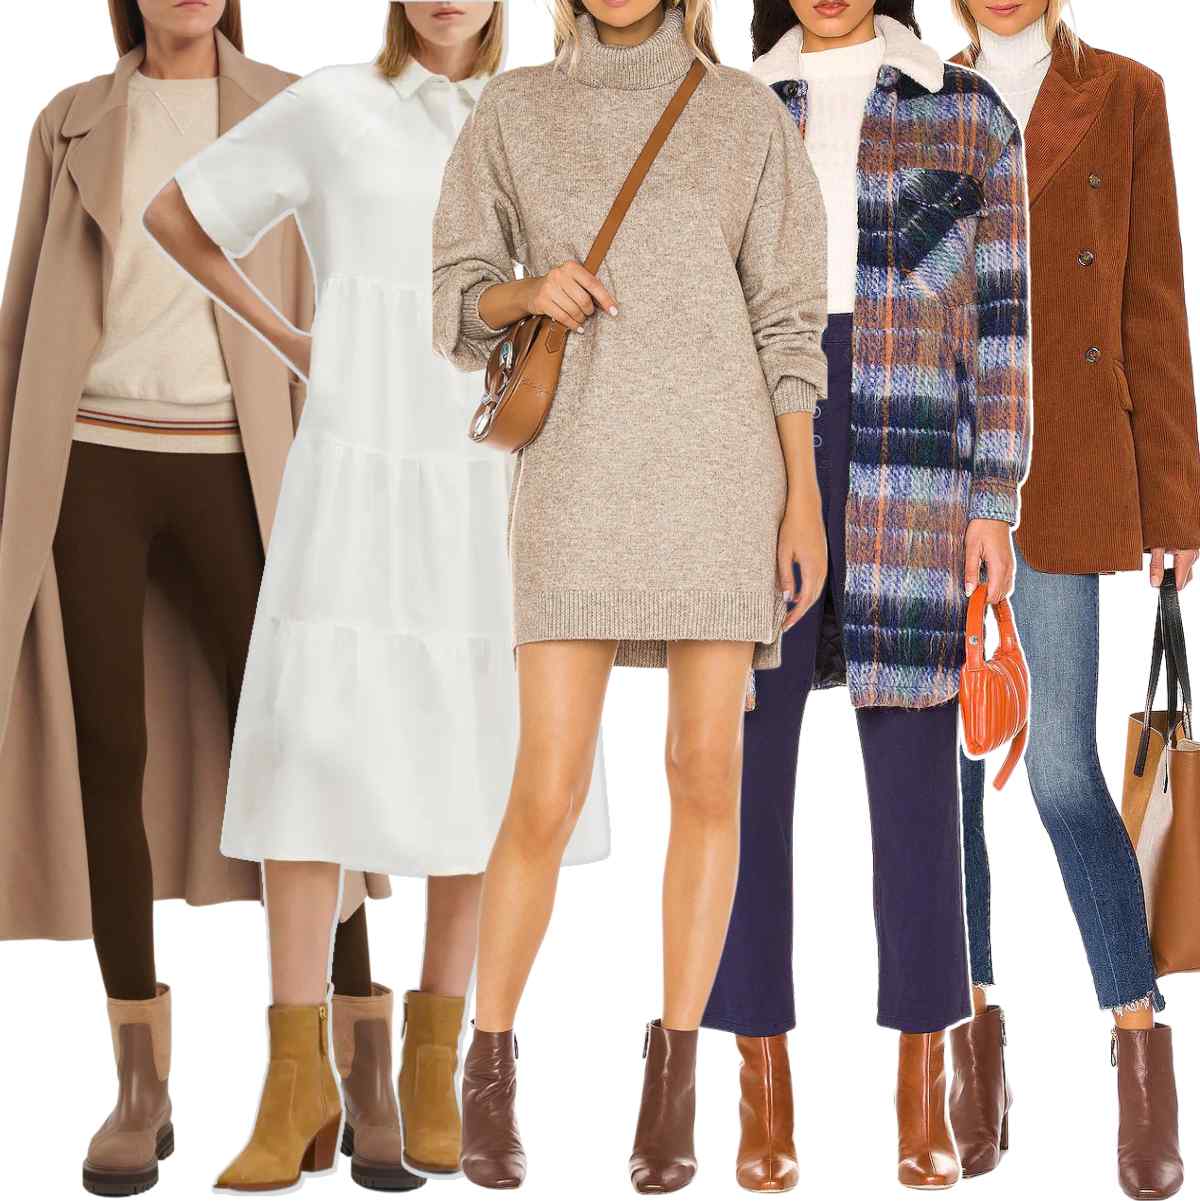 Collage of 5 women wearing different outfits with brown ankle boots.